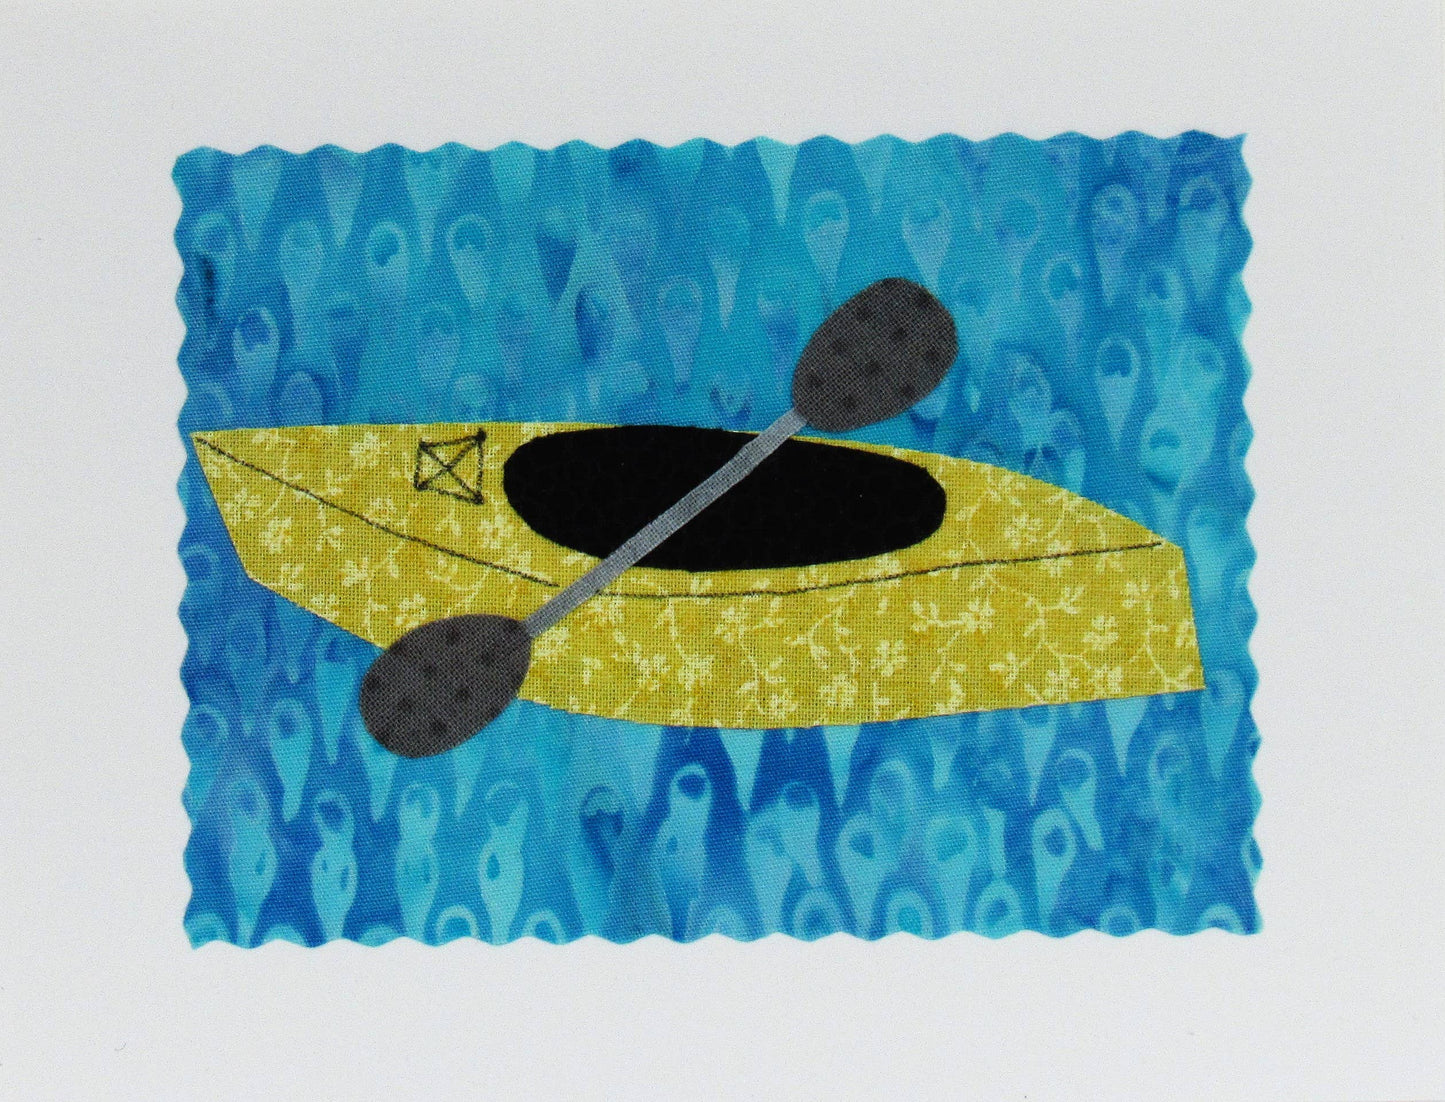 Kayak Card - Hand Made Fabric and Paper Greeting Card - Mellow Monkey